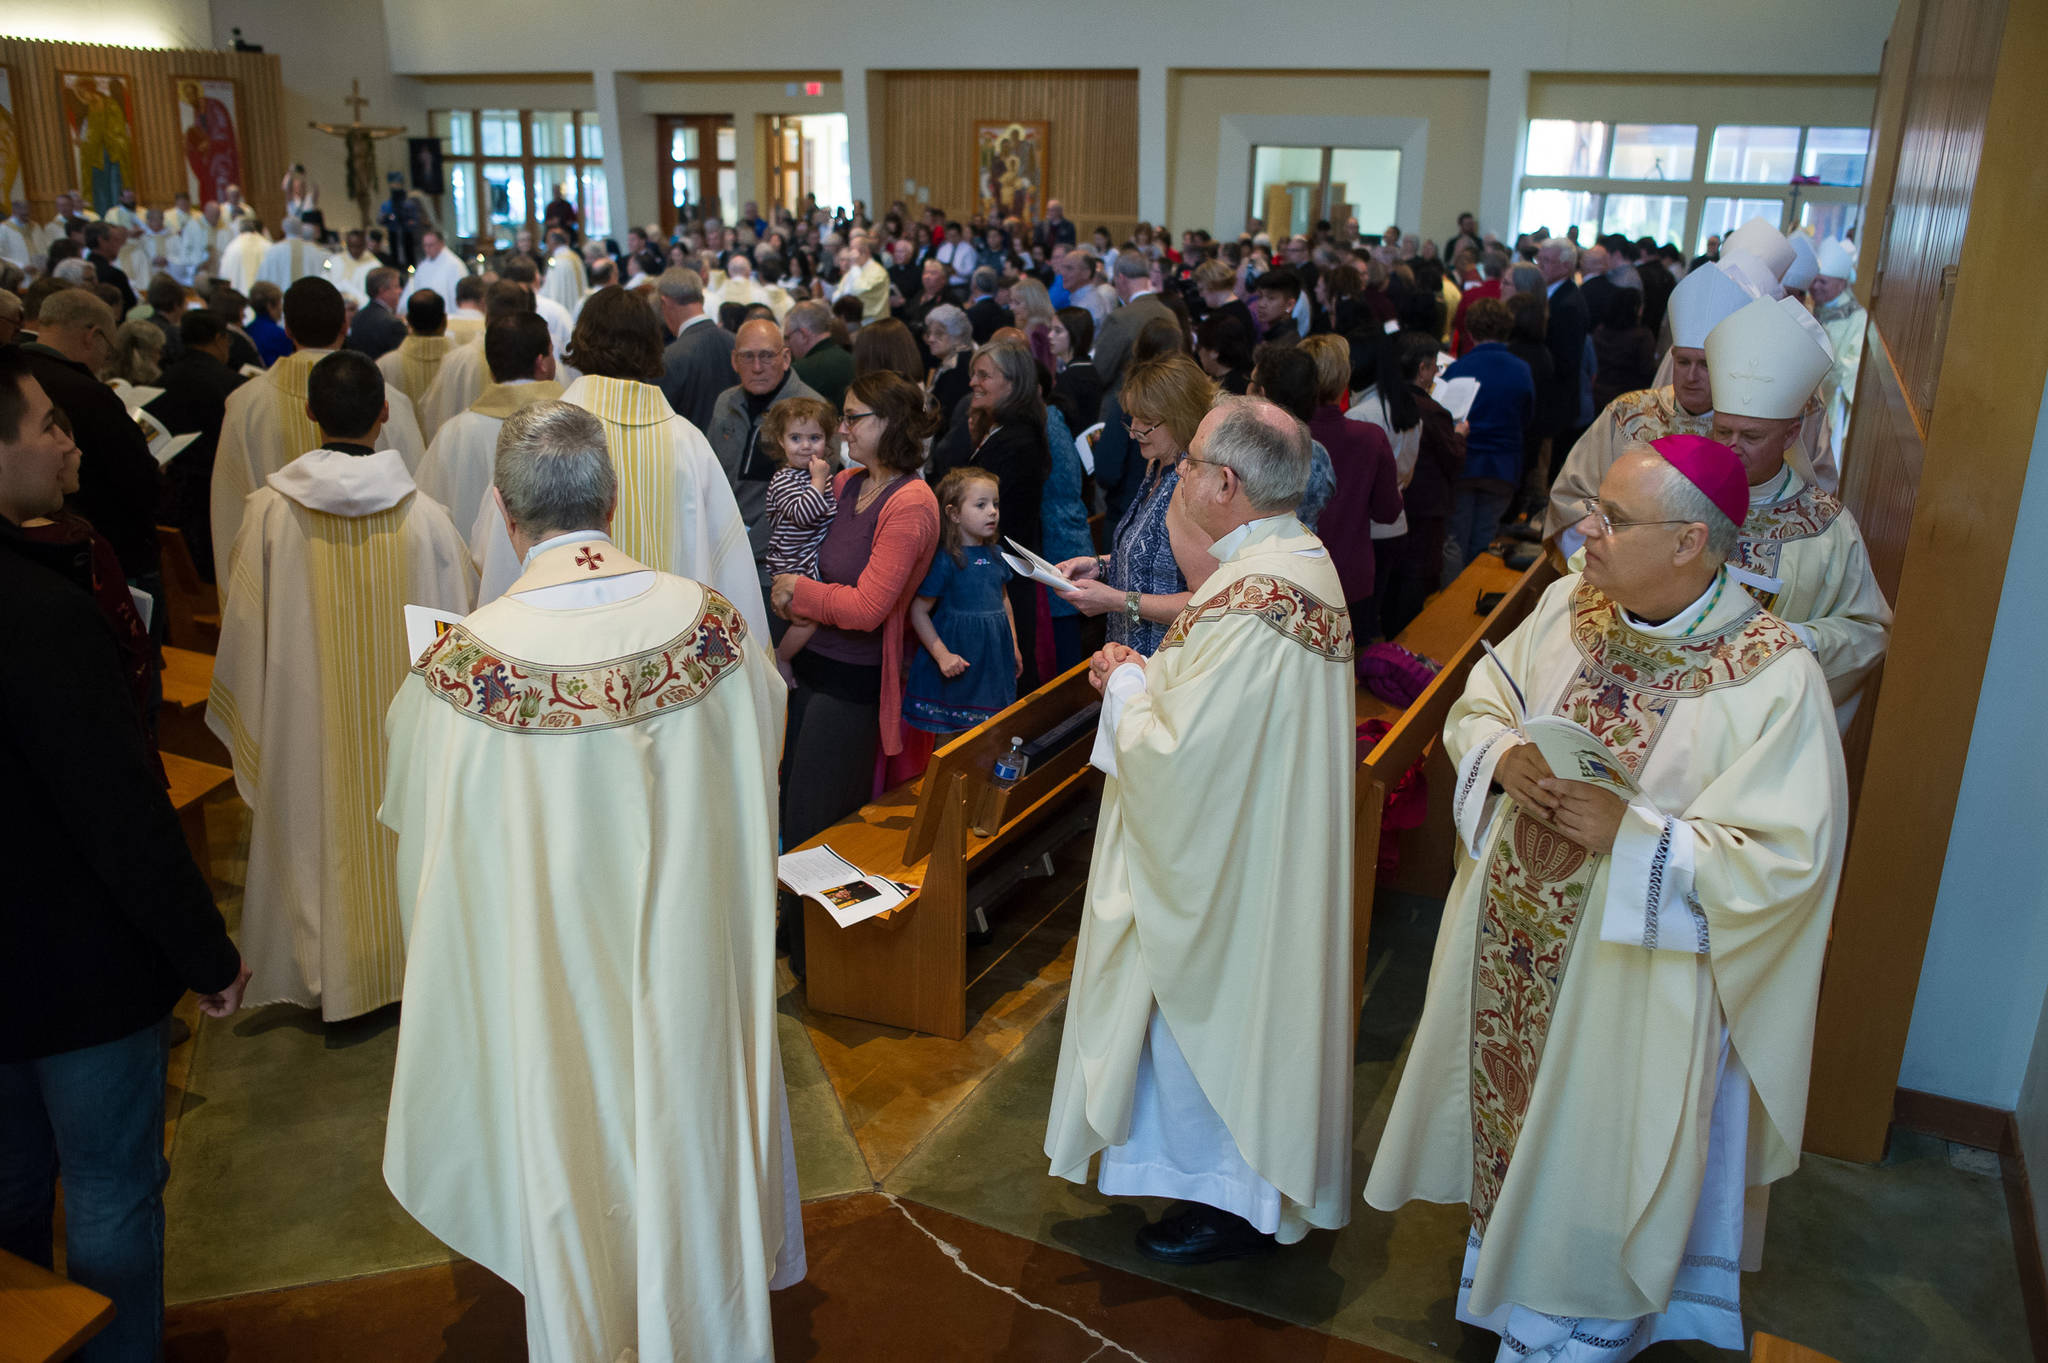 Priests from around Alaska along with Father Andrew E. Bellisario, right, enter St. Paul the Apostle Catholic Church for his Ordination and Installation as the Sixth Bishop of the Diocese of Juneau on Tuesday, Oct. 10, 2017. (Michael Penn | Juneau Empire File)